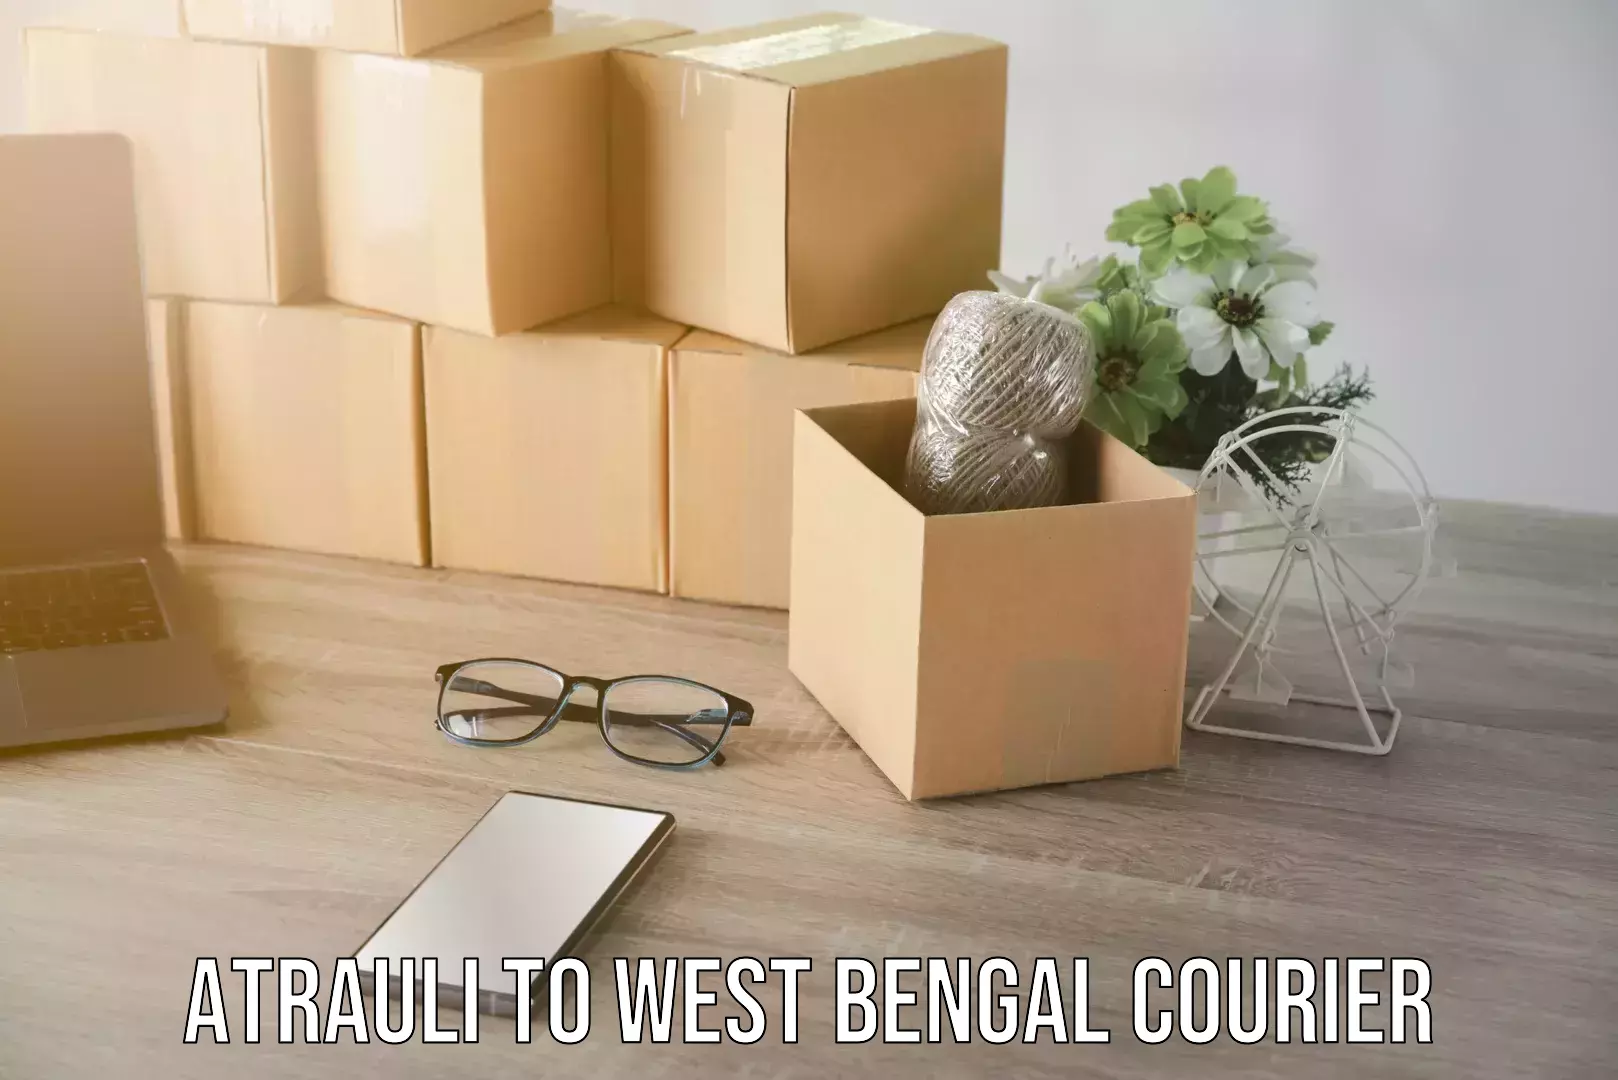 On-call courier service in Atrauli to West Bengal